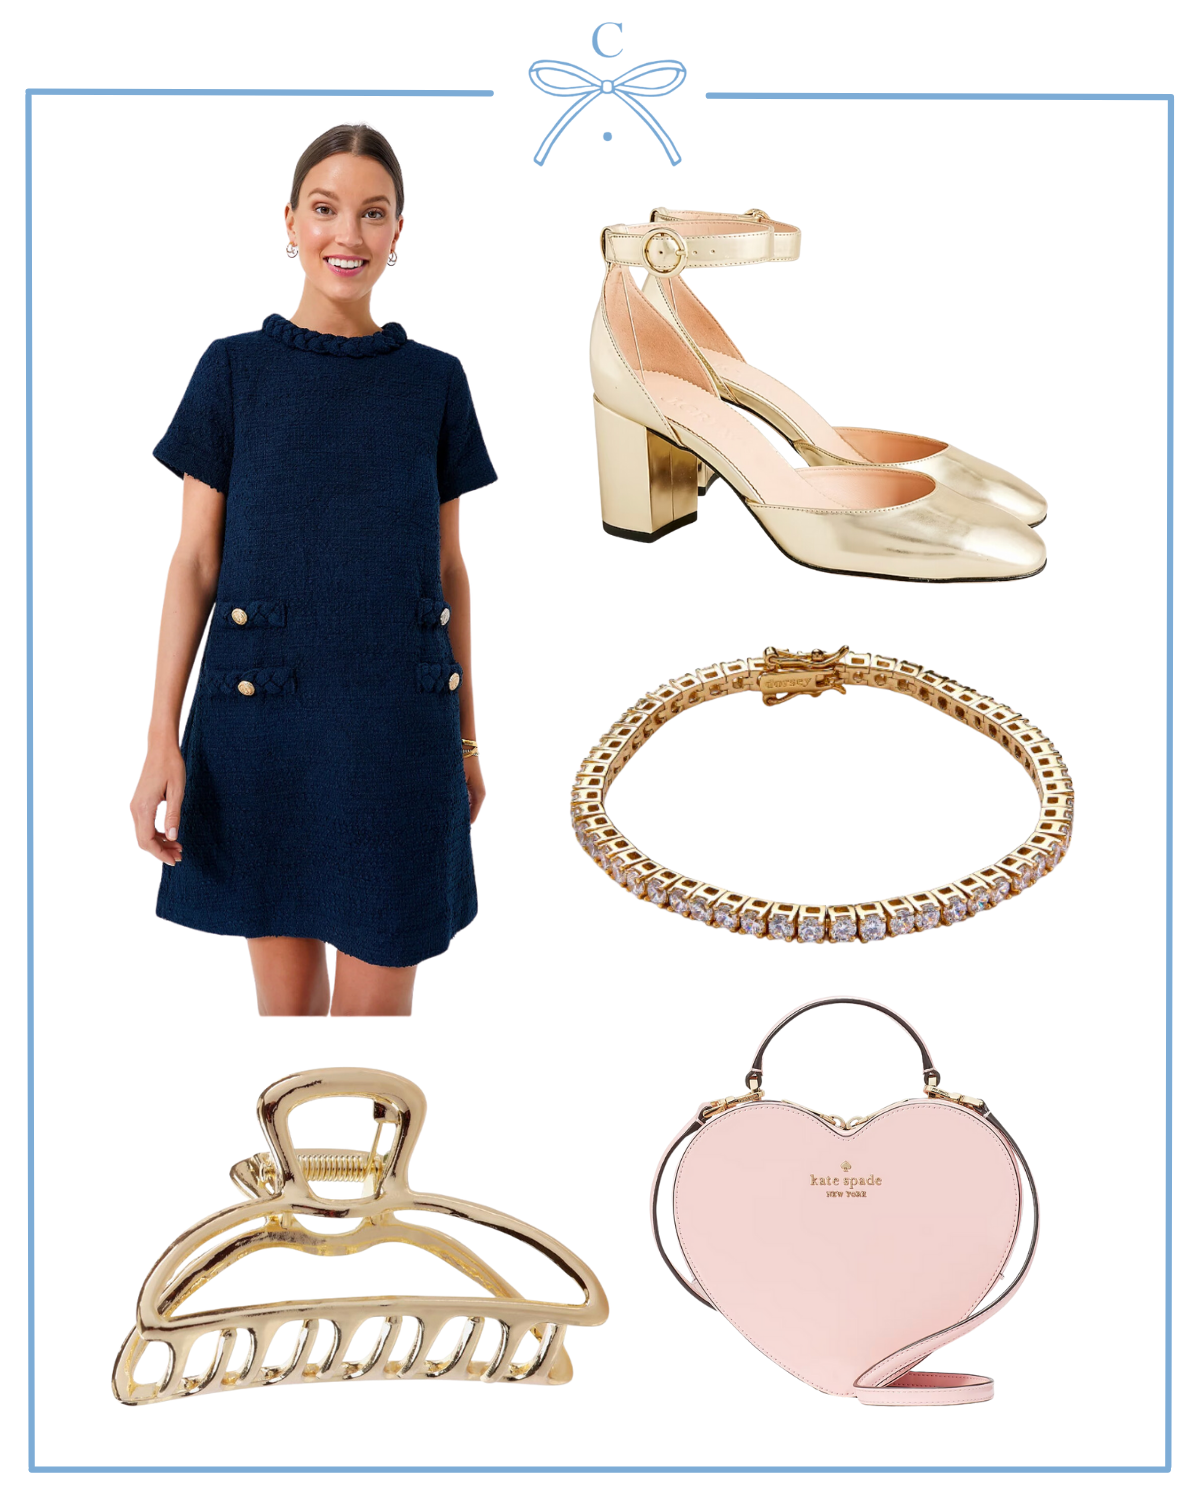 Valentine's Day outfit from Tuckernuck, J.Crew, Dorsey, Kate Spade, and Kitsch